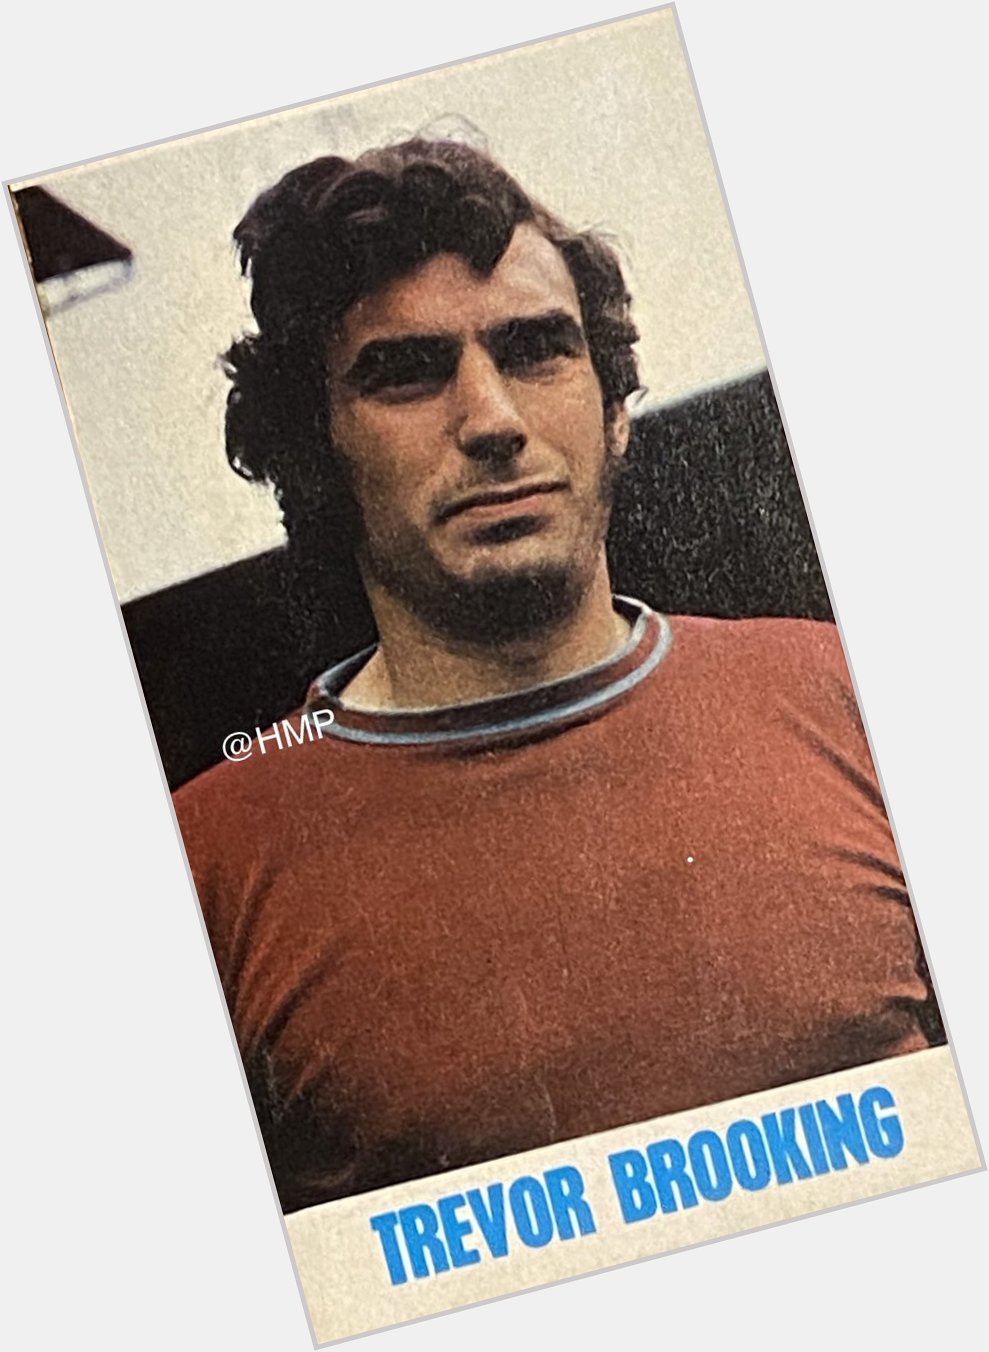 Happy 74th Birthday to Legend Sir Trevor Brooking.many happy returns,hope u have a great day!        